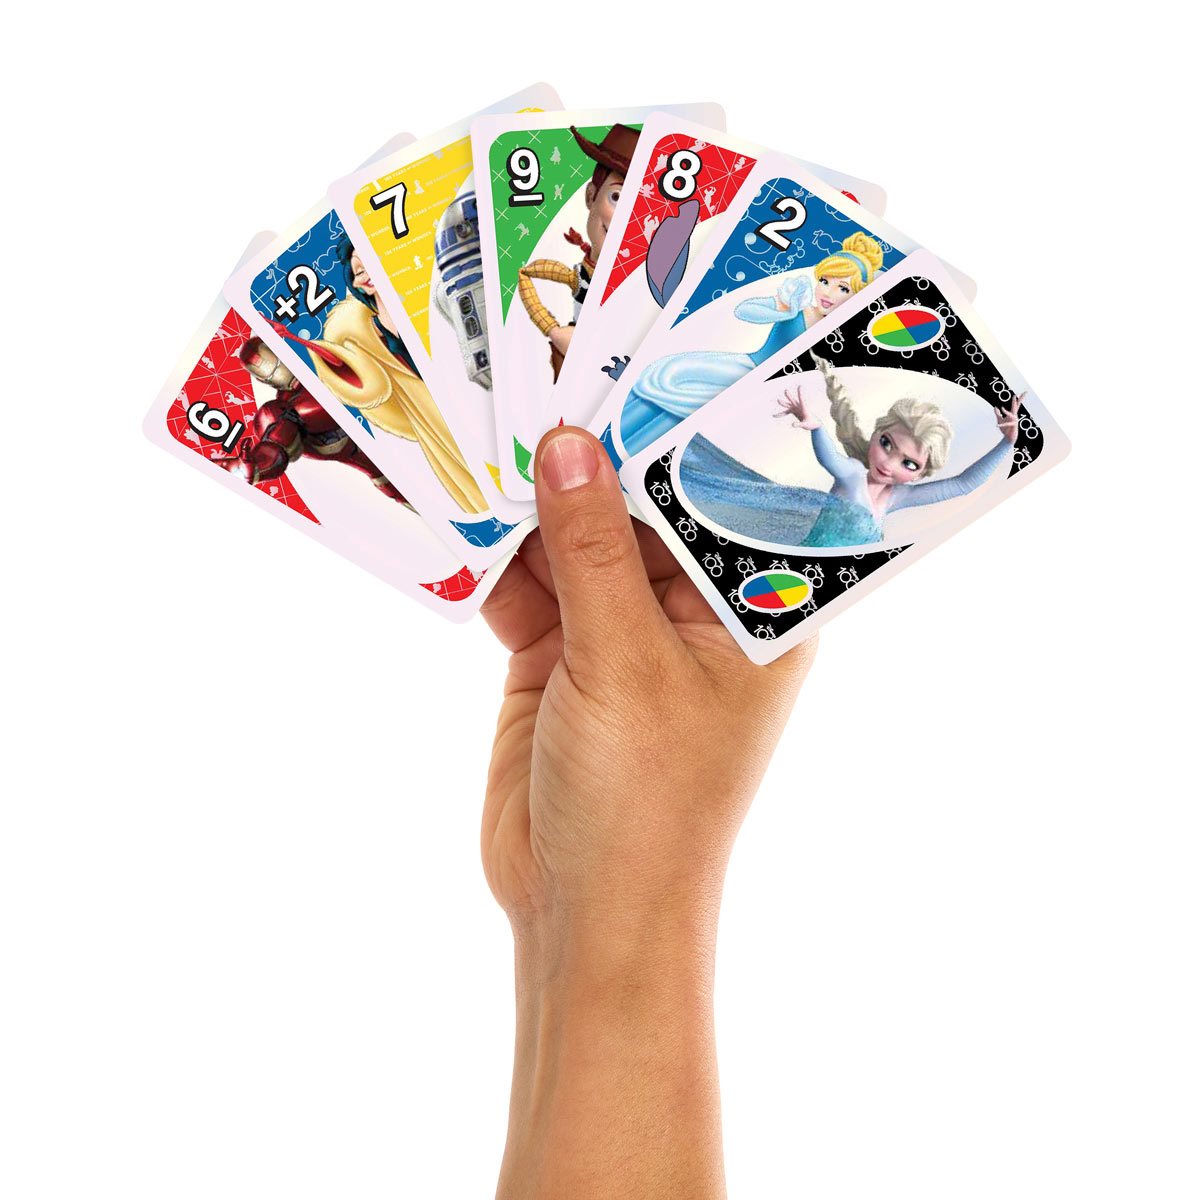 UNO Disney 100 Rules And Cards - Learning Board Games